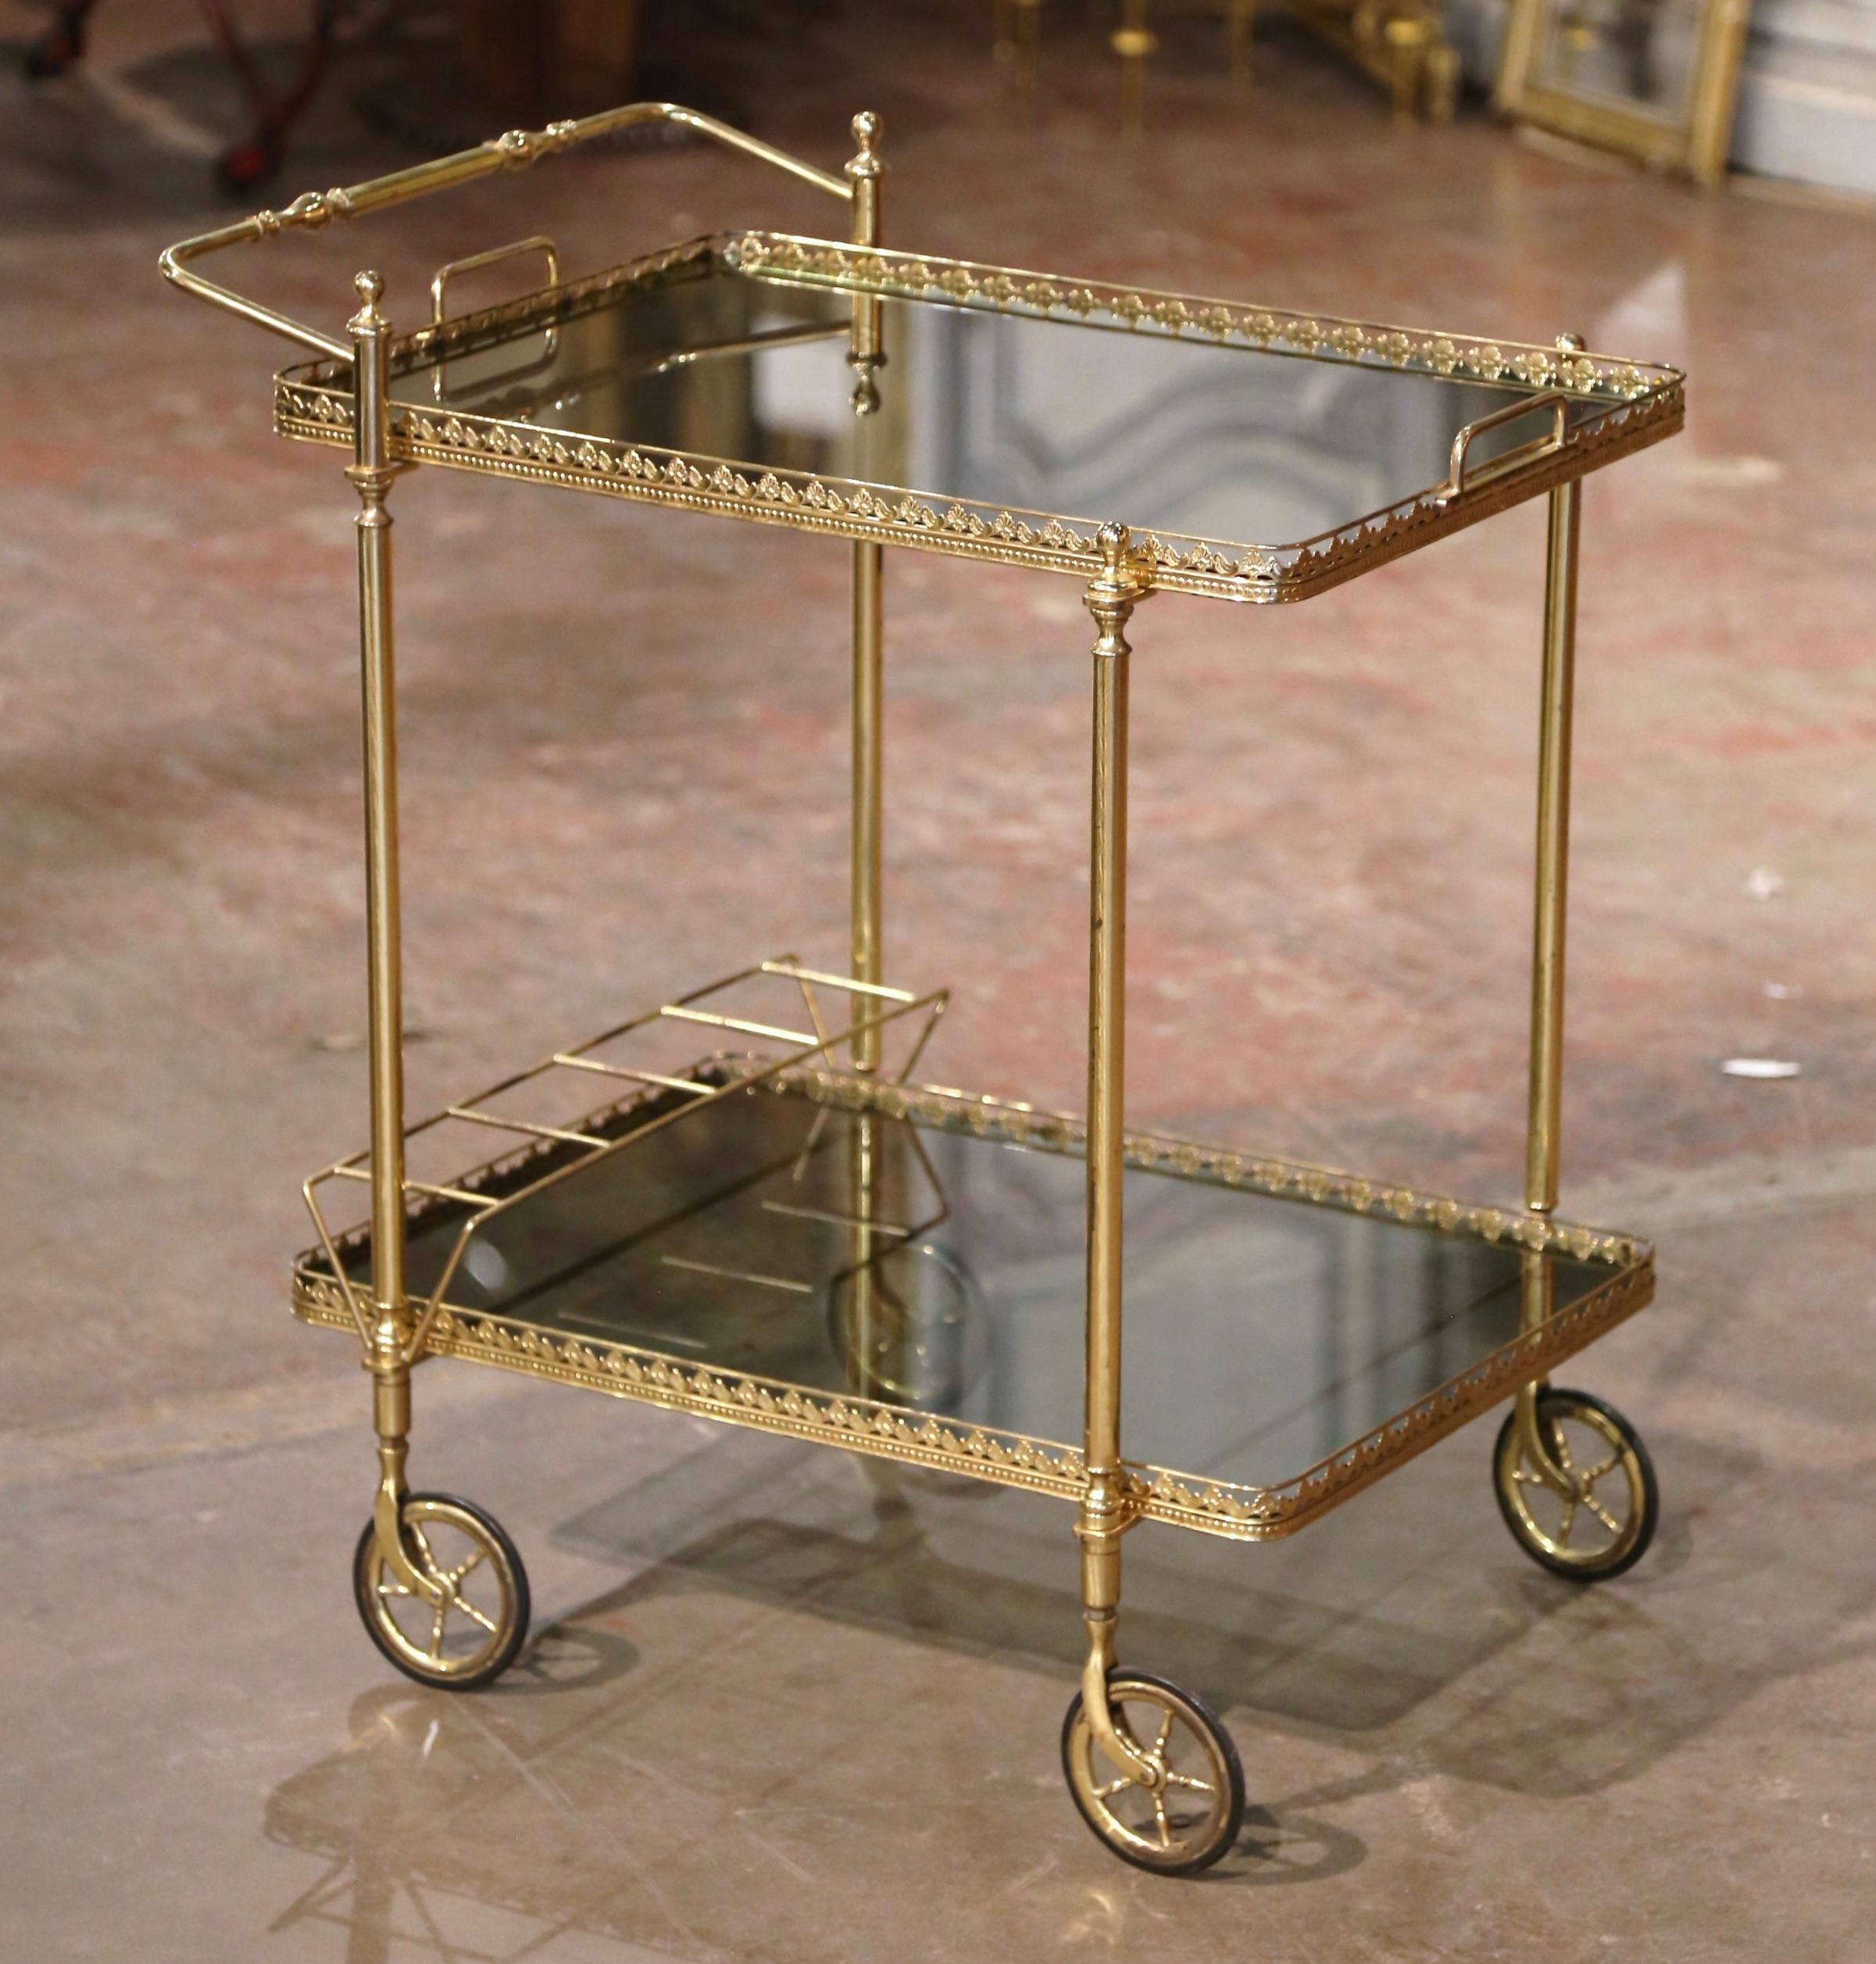 This elegant vintage rolling bar cart was created in France, circa 1960. Built in brass a with a rectangle shape, the two-tier dessert trolley stands on small round wheels with rubber tires, over two plateau topped tinted glass surfaces. The top